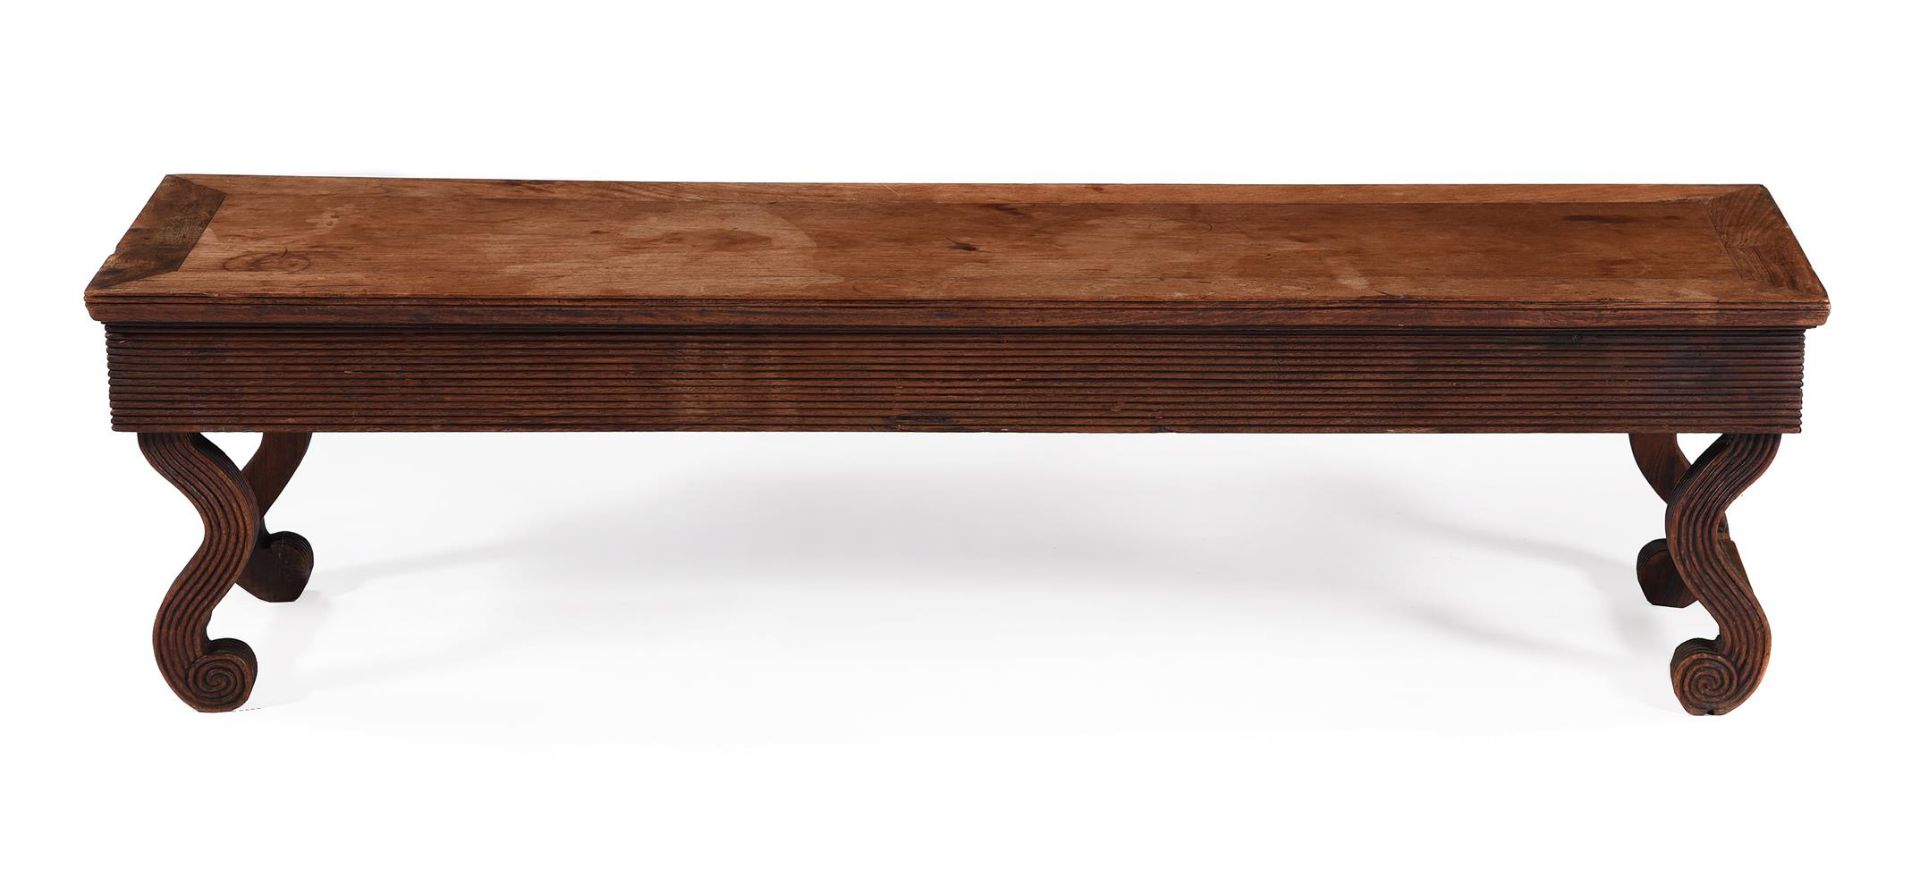 Y AN EXOTIC HARDWOOD, PROBABLY PADOUK, HALL BENCH